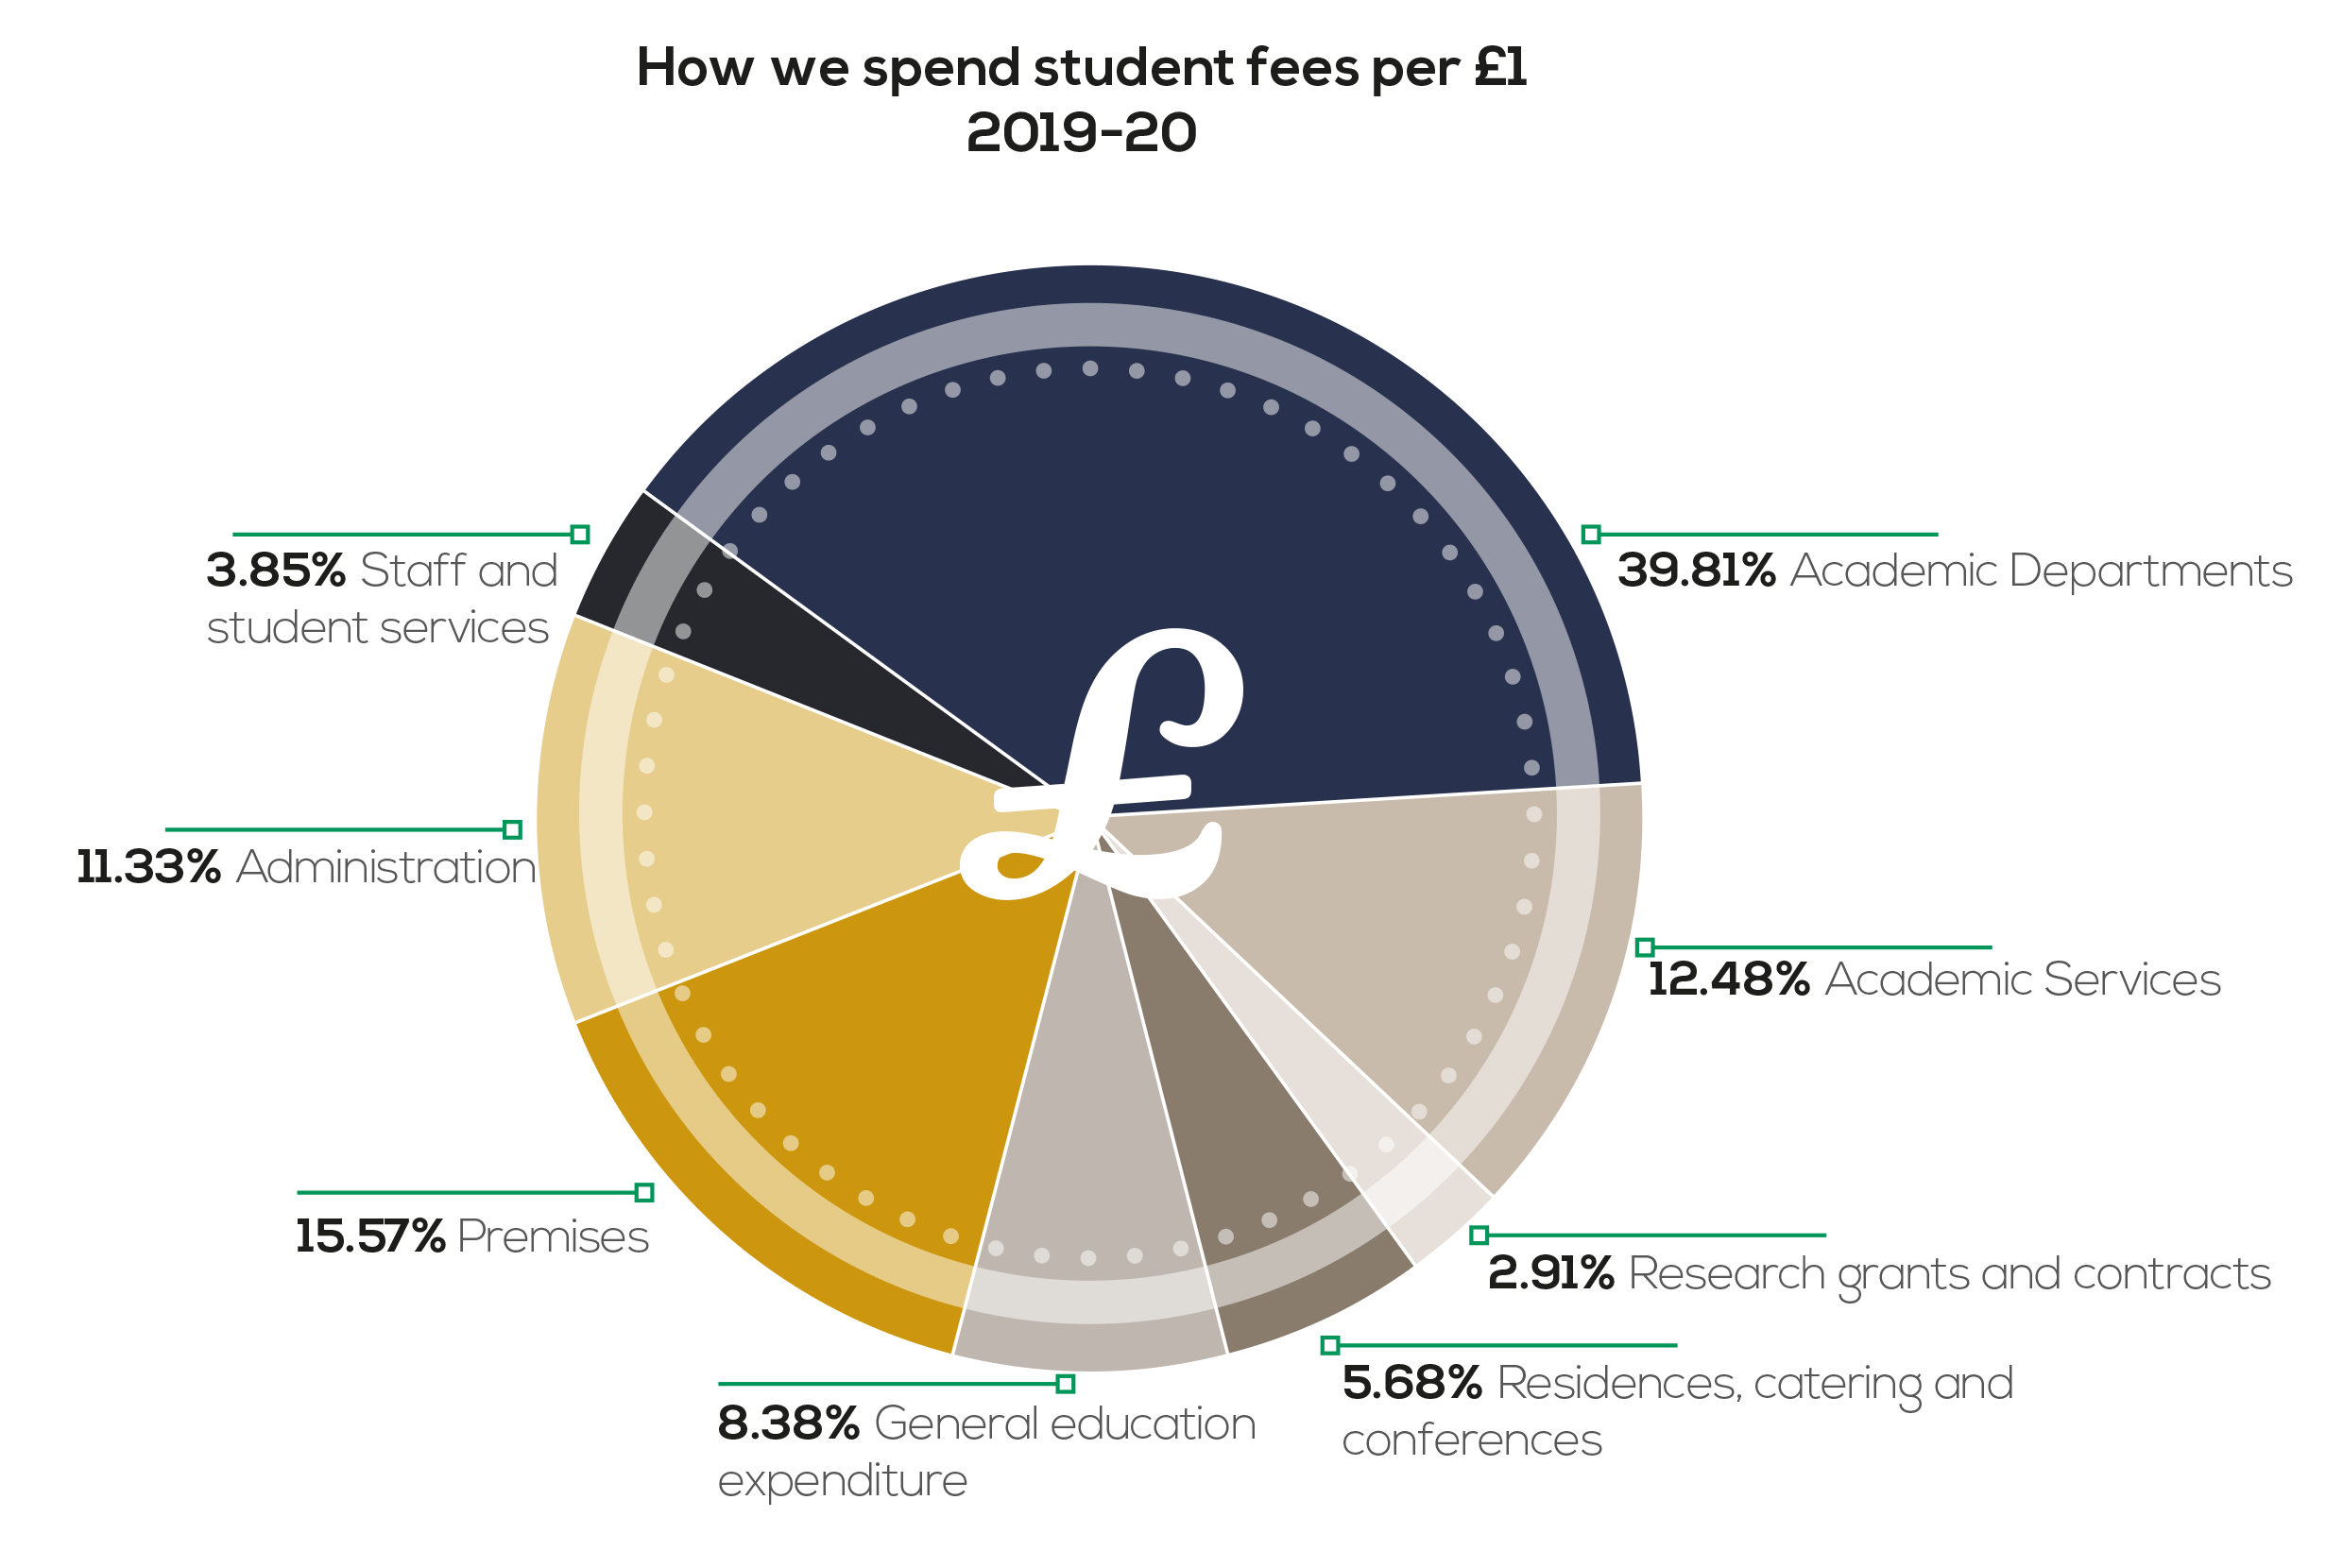 A pie chart showing how we spent student fees per £1 during 2019-20.